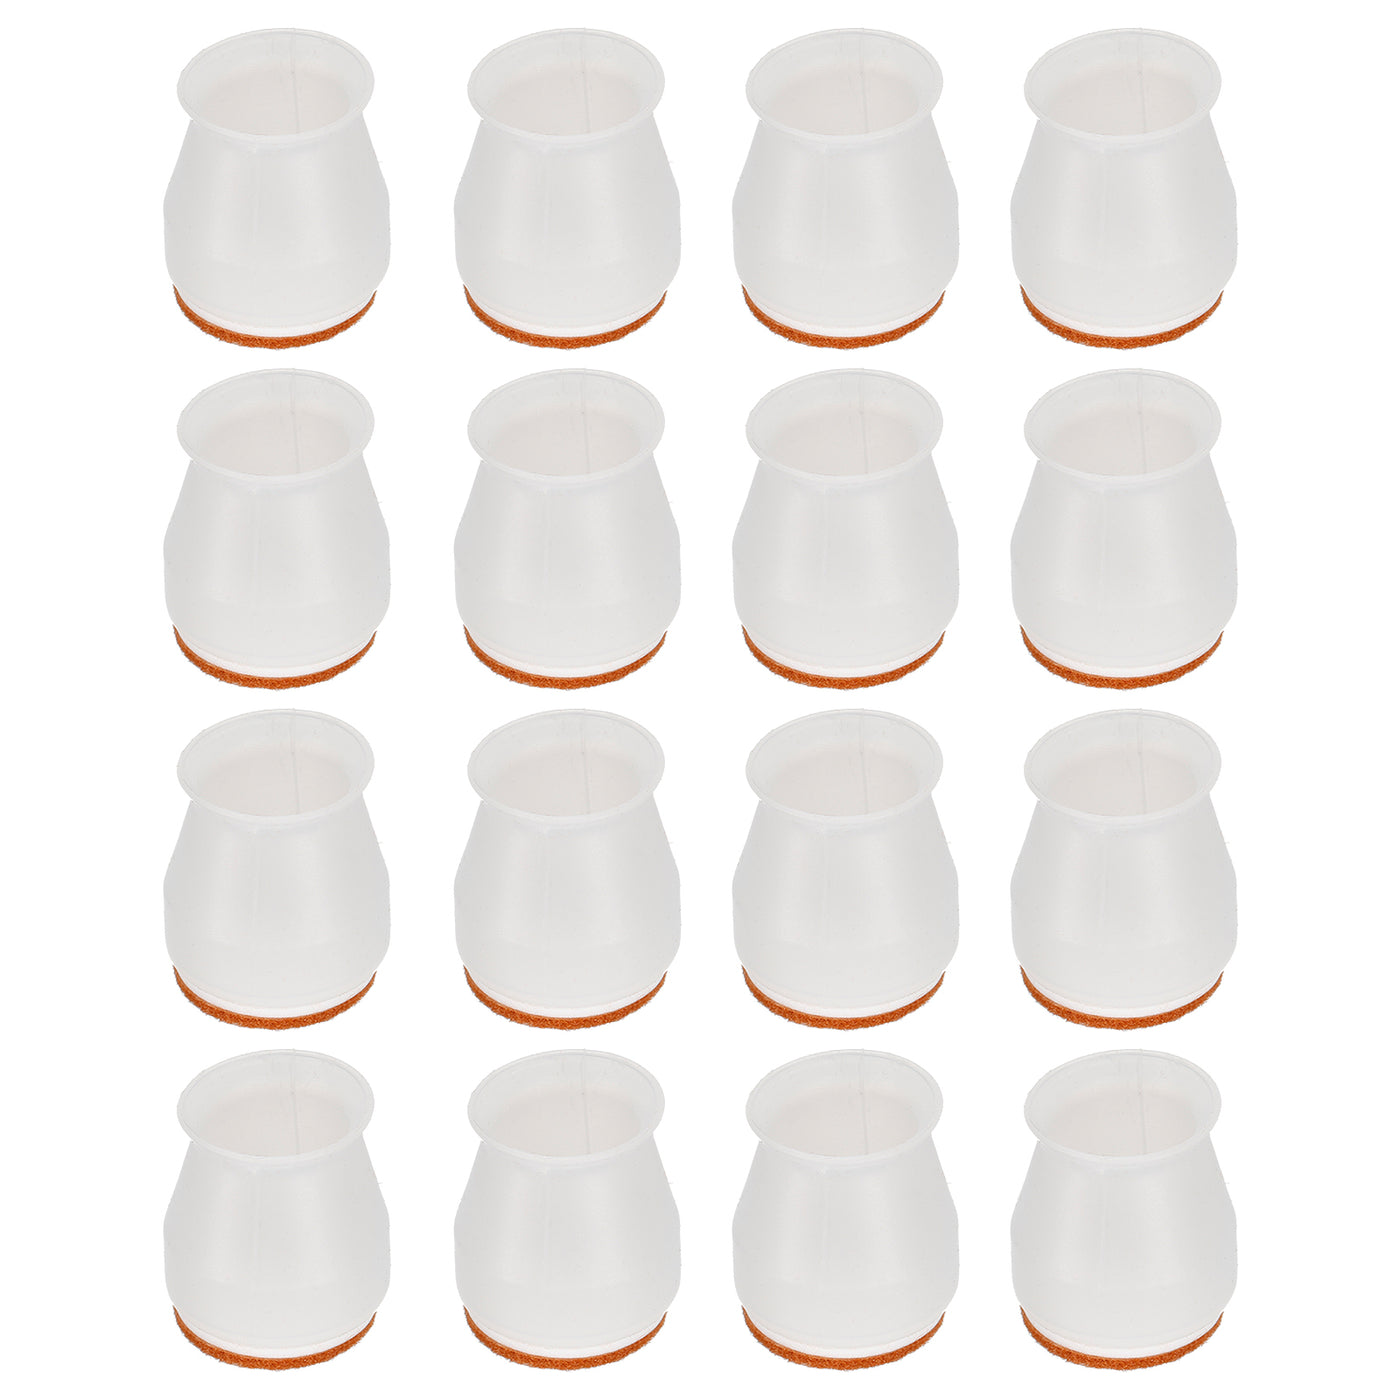 uxcell Uxcell Chair Leg Floor Protectors, 24Pcs 28mm/ 1.1" Silicone & Felt Chair Leg Cover Caps for Hardwood Floors (White)